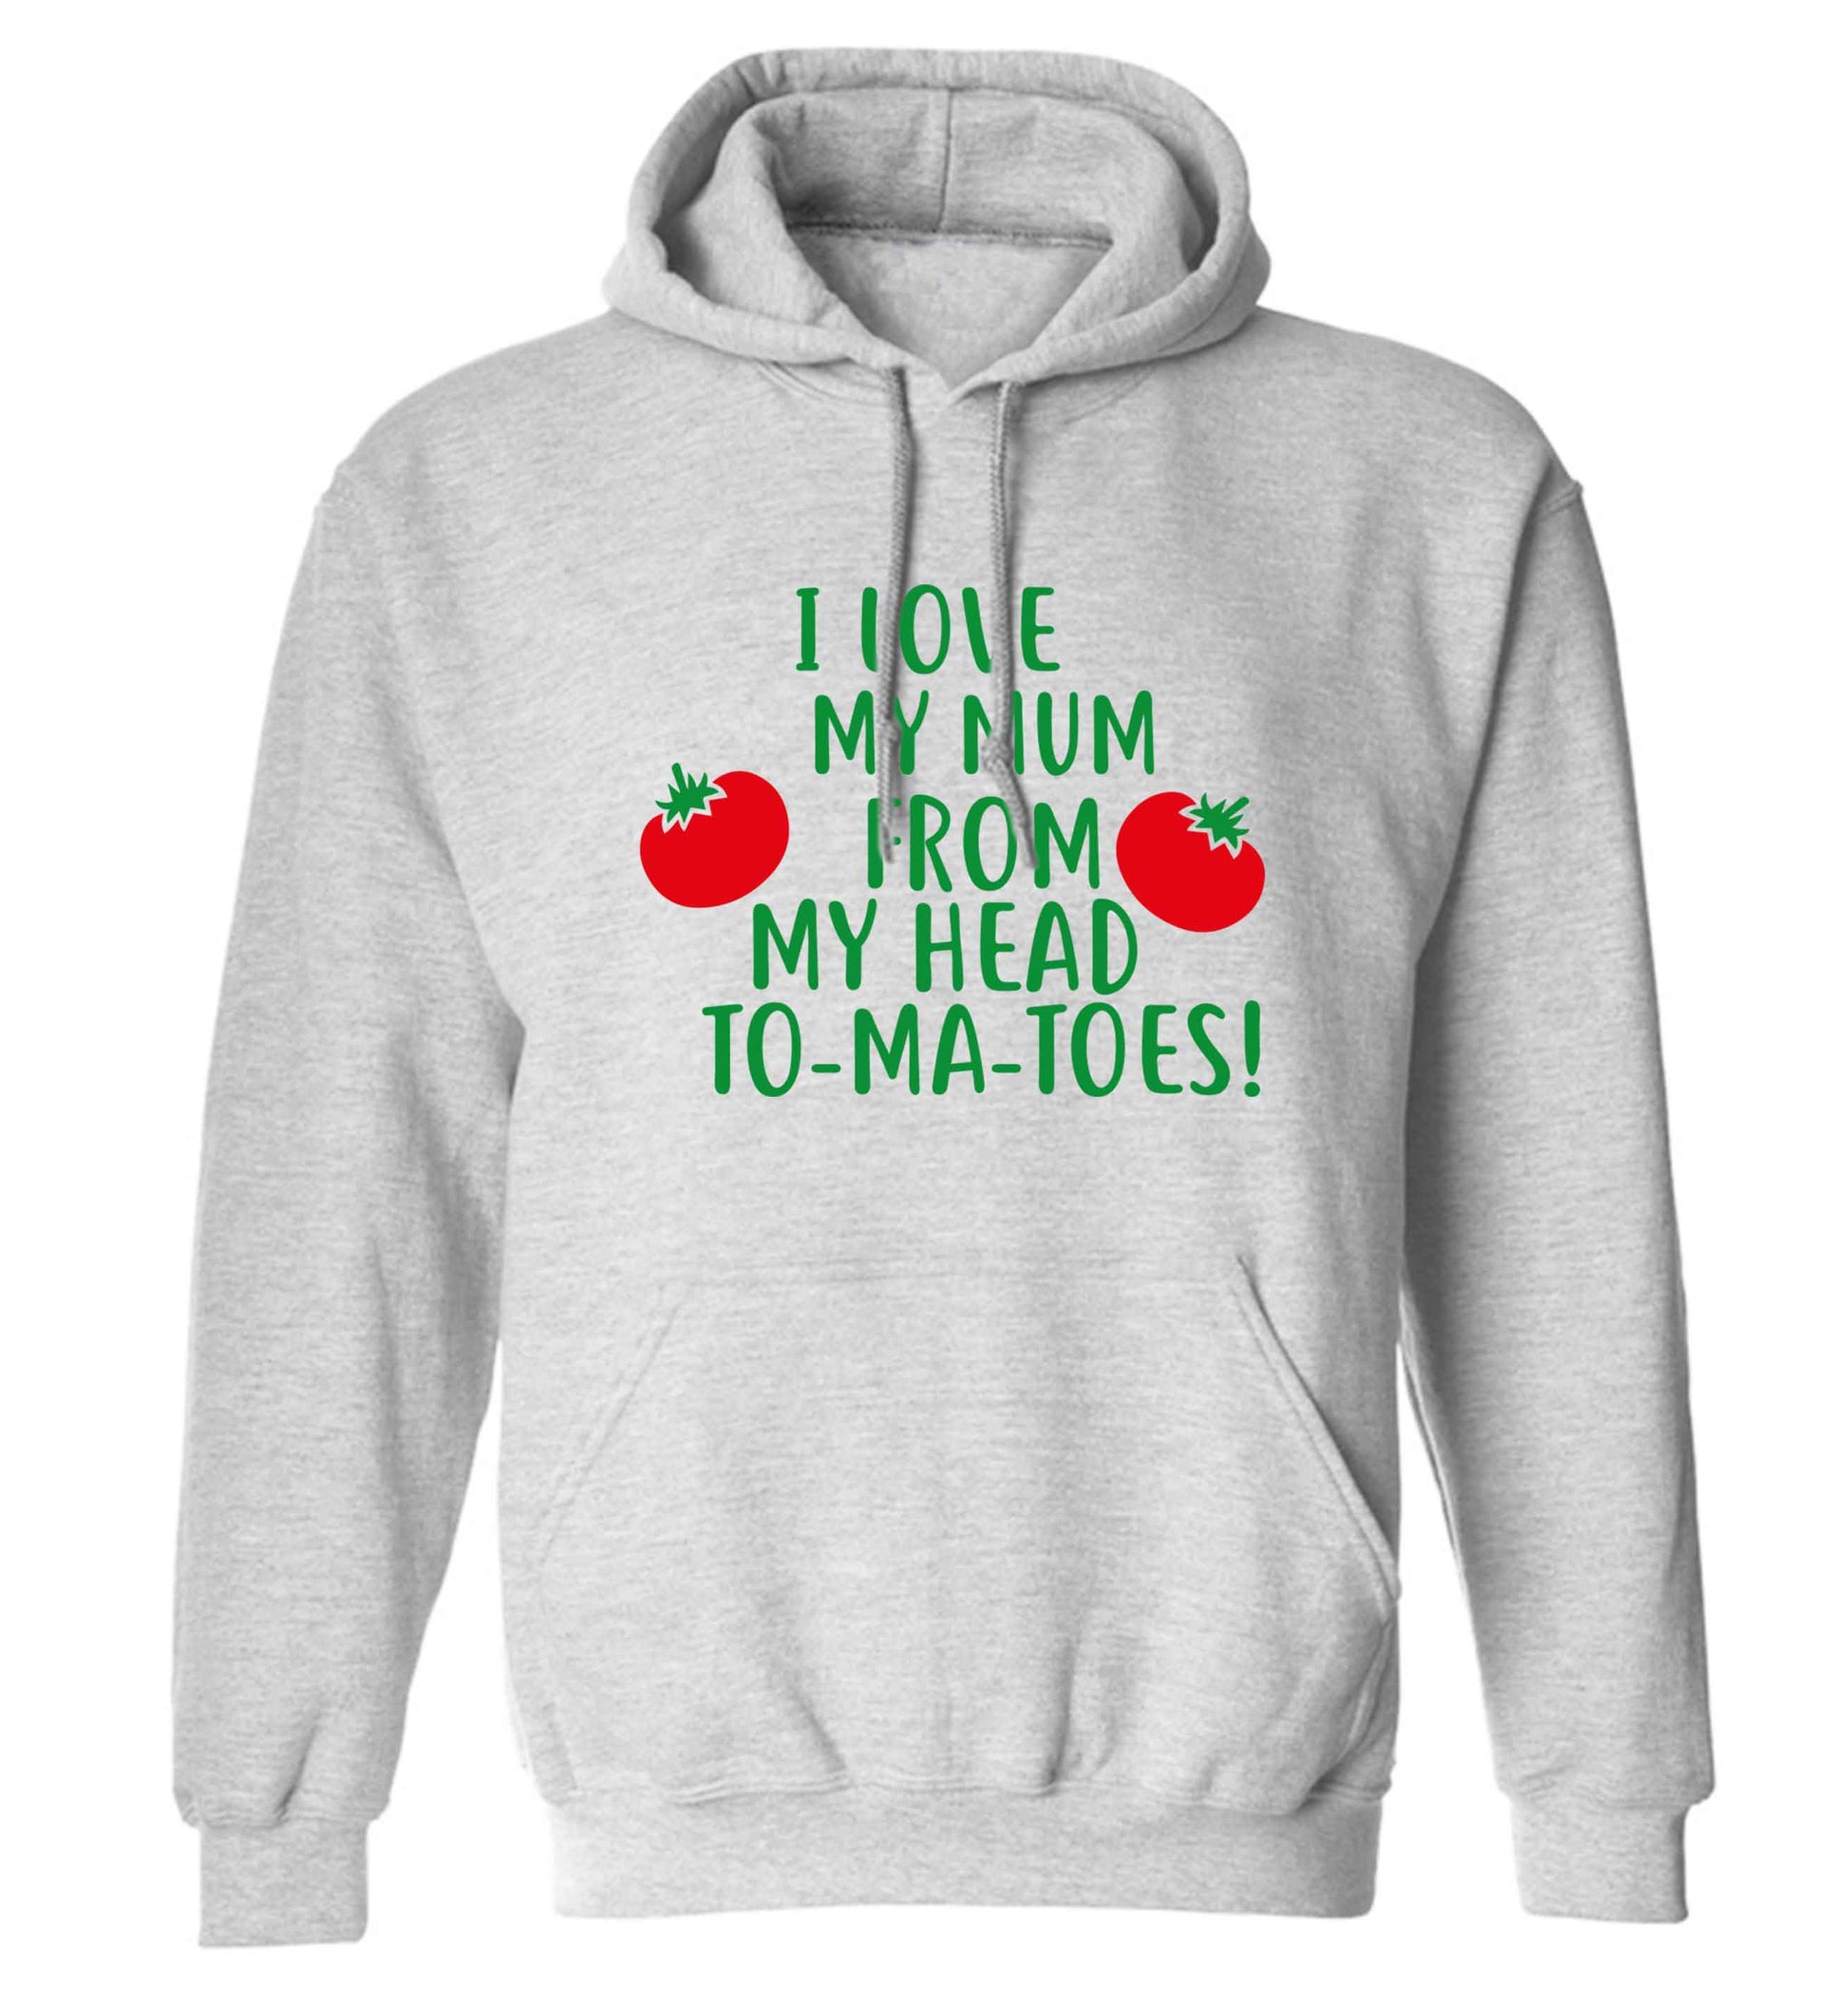 I love my mum from my head to-my-toes! adults unisex grey hoodie 2XL